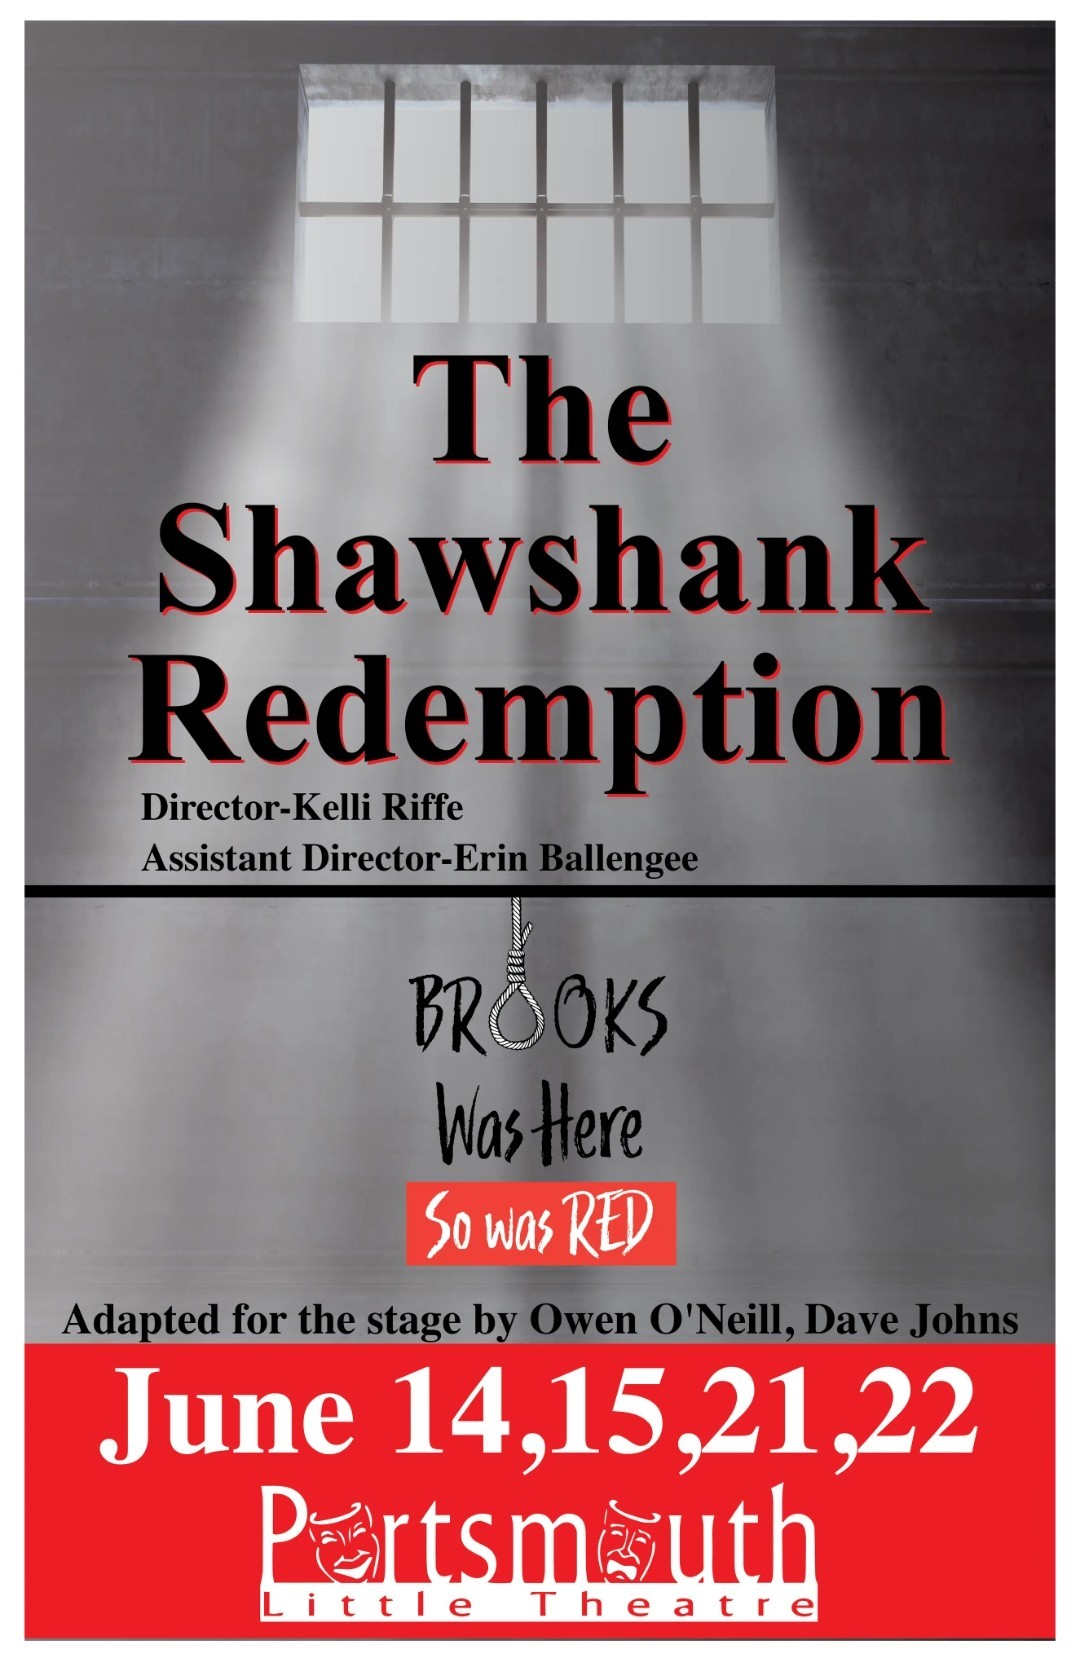 Shawshank Redemption  on Jun 22, 19:30@Portsmouth Little Theatre - Pick a seat, Buy tickets and Get information on Portsmouth Little Theatre 